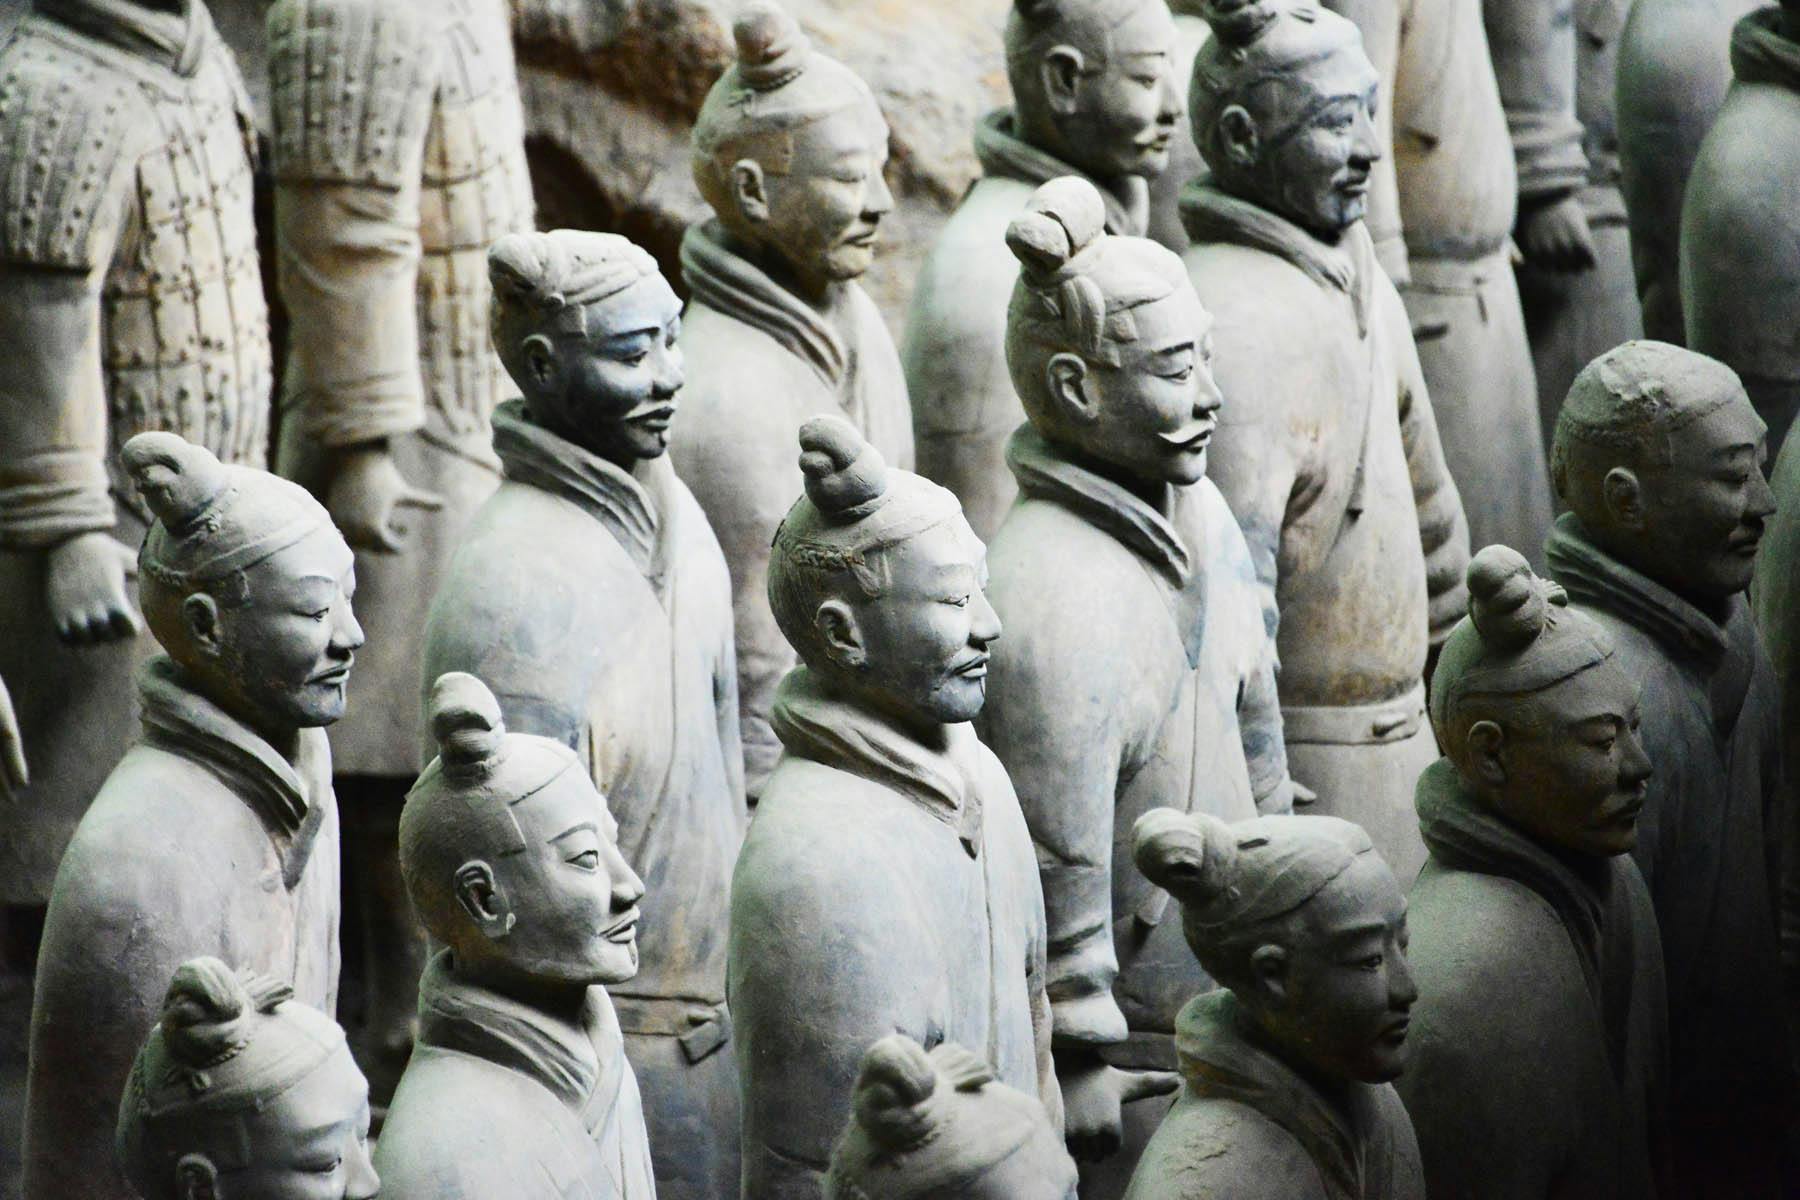 Terracotta Warriors and Tang Dynasty Show Xi'an small-group tour with a local guide Musement